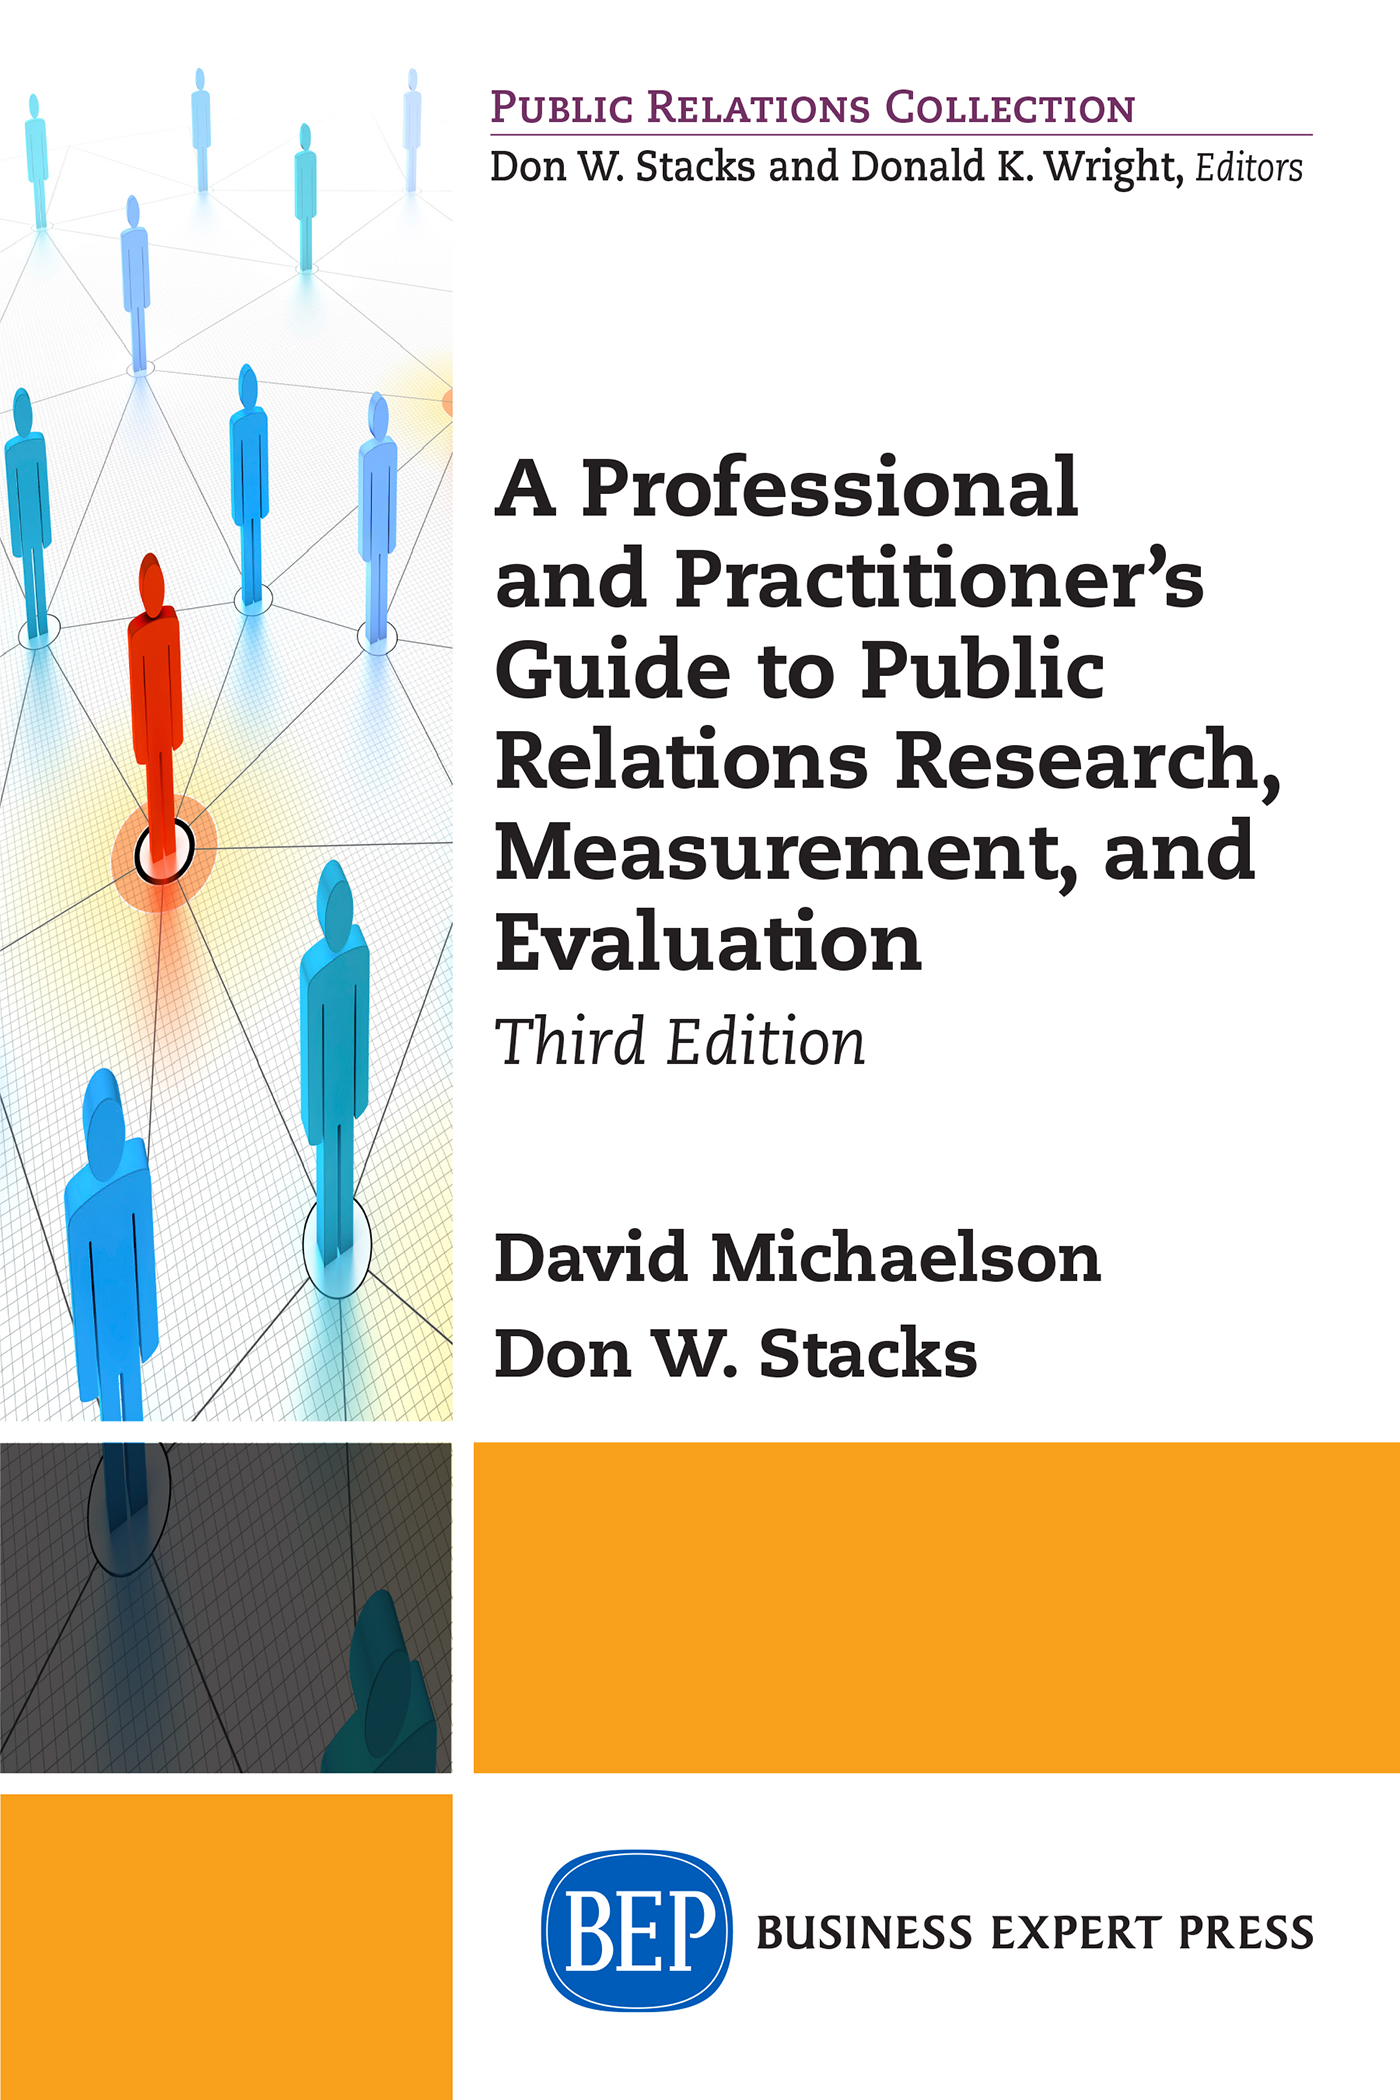 A Professional and Practitioner's Guide to Public Relations Research, Measurement, and Evaluation, Third Edition -  3rd Edition